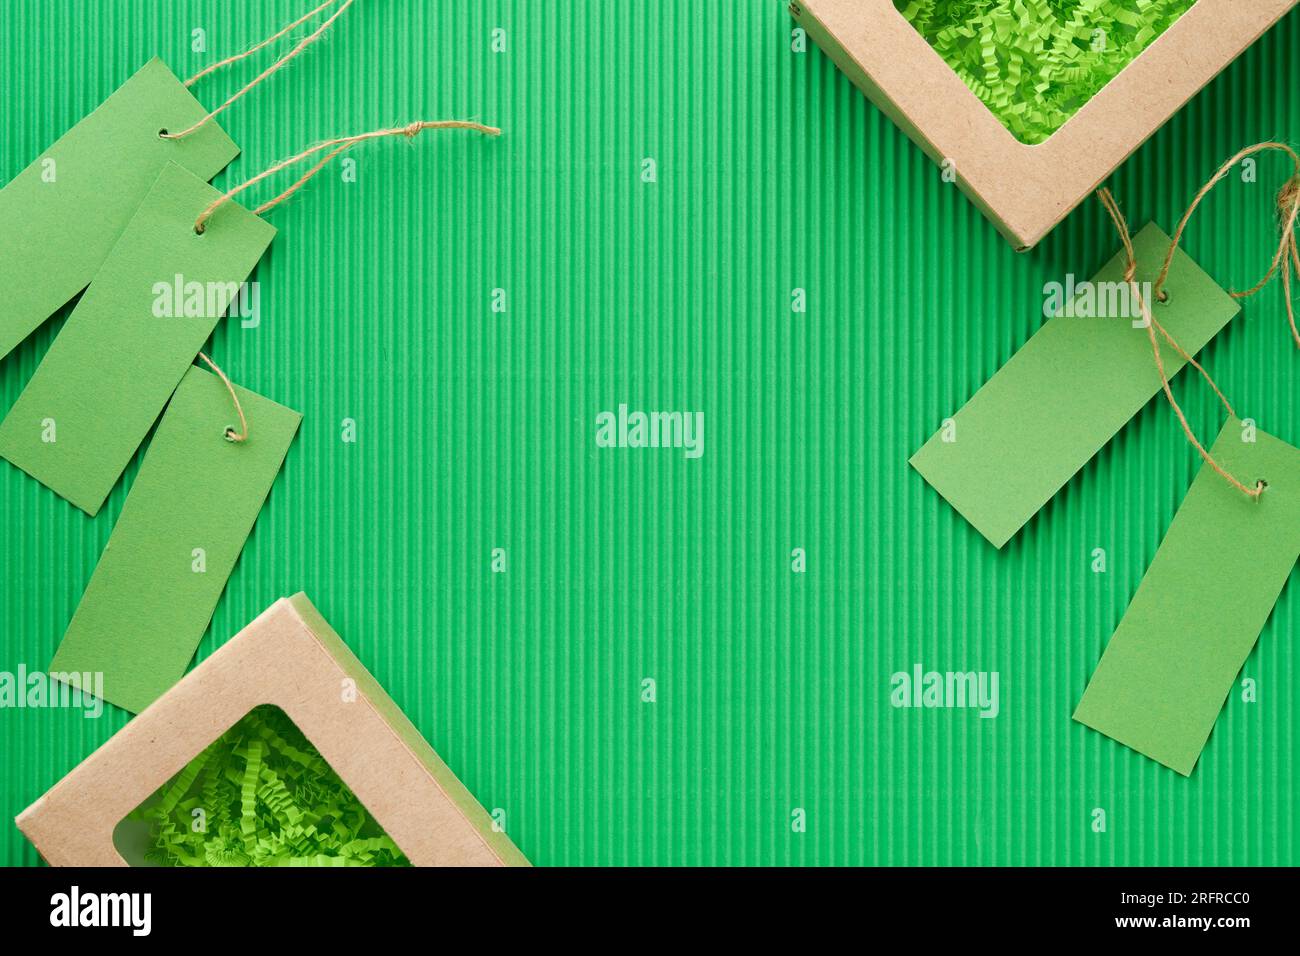 Green Friday backgrounds mock up. Sale Tag on green background. Paper shopping boxes and green tag. Environmentally friendly shopping idea, useful thi Stock Photo